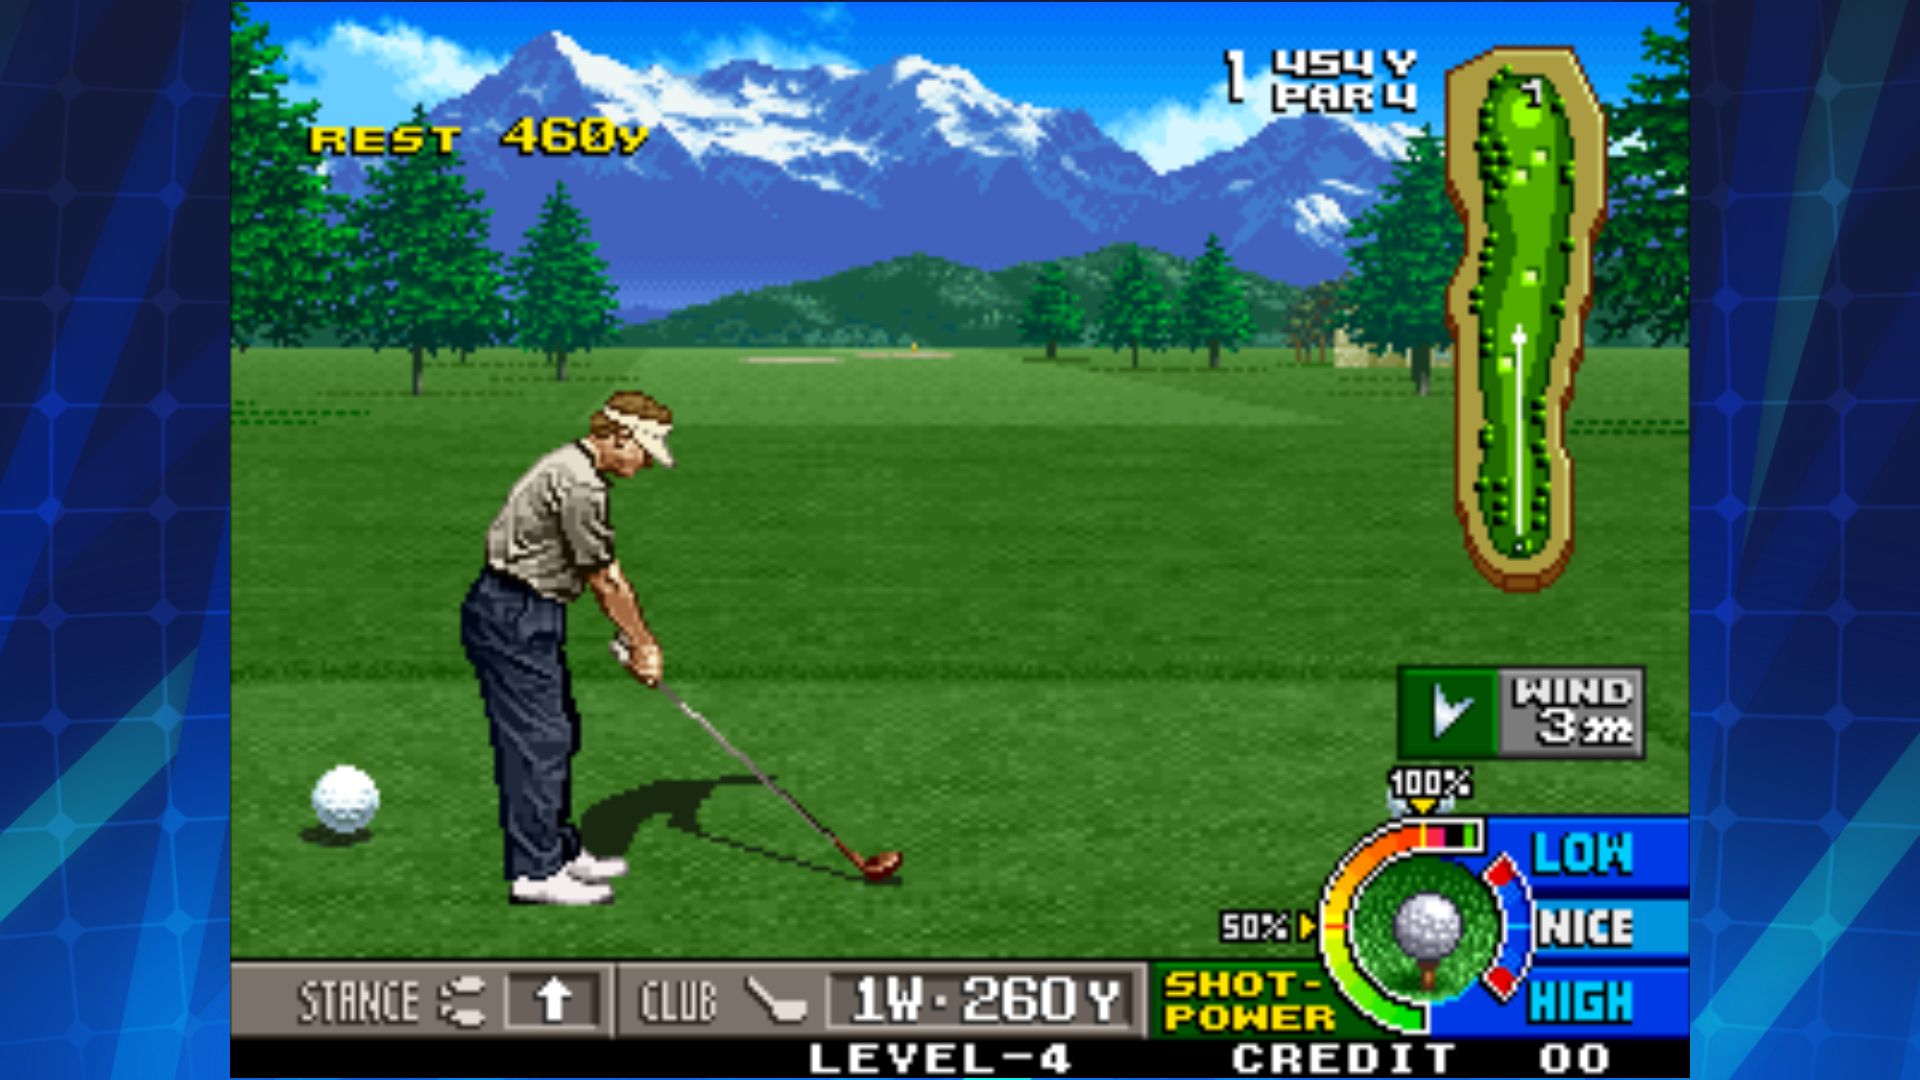 Gameplay of the BIG TOURNAMENT GOLF ACA NEOGEO for Android phone or tablet.